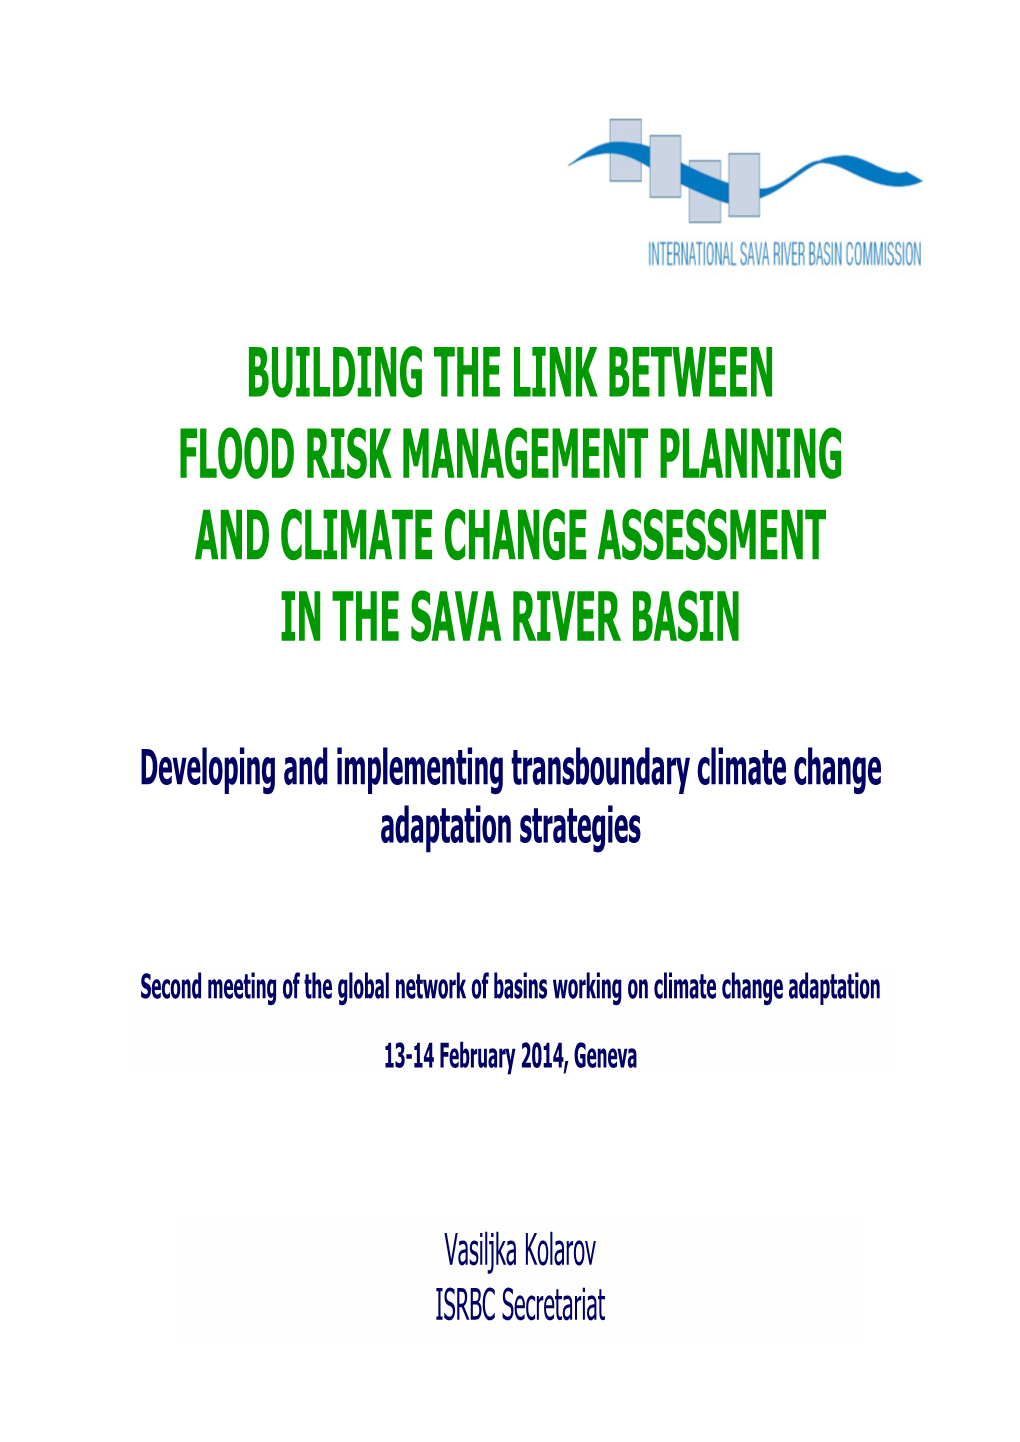 Building the Link Between Flood Risk Management Planning and Climate Change Assessment in the Sava River Basin